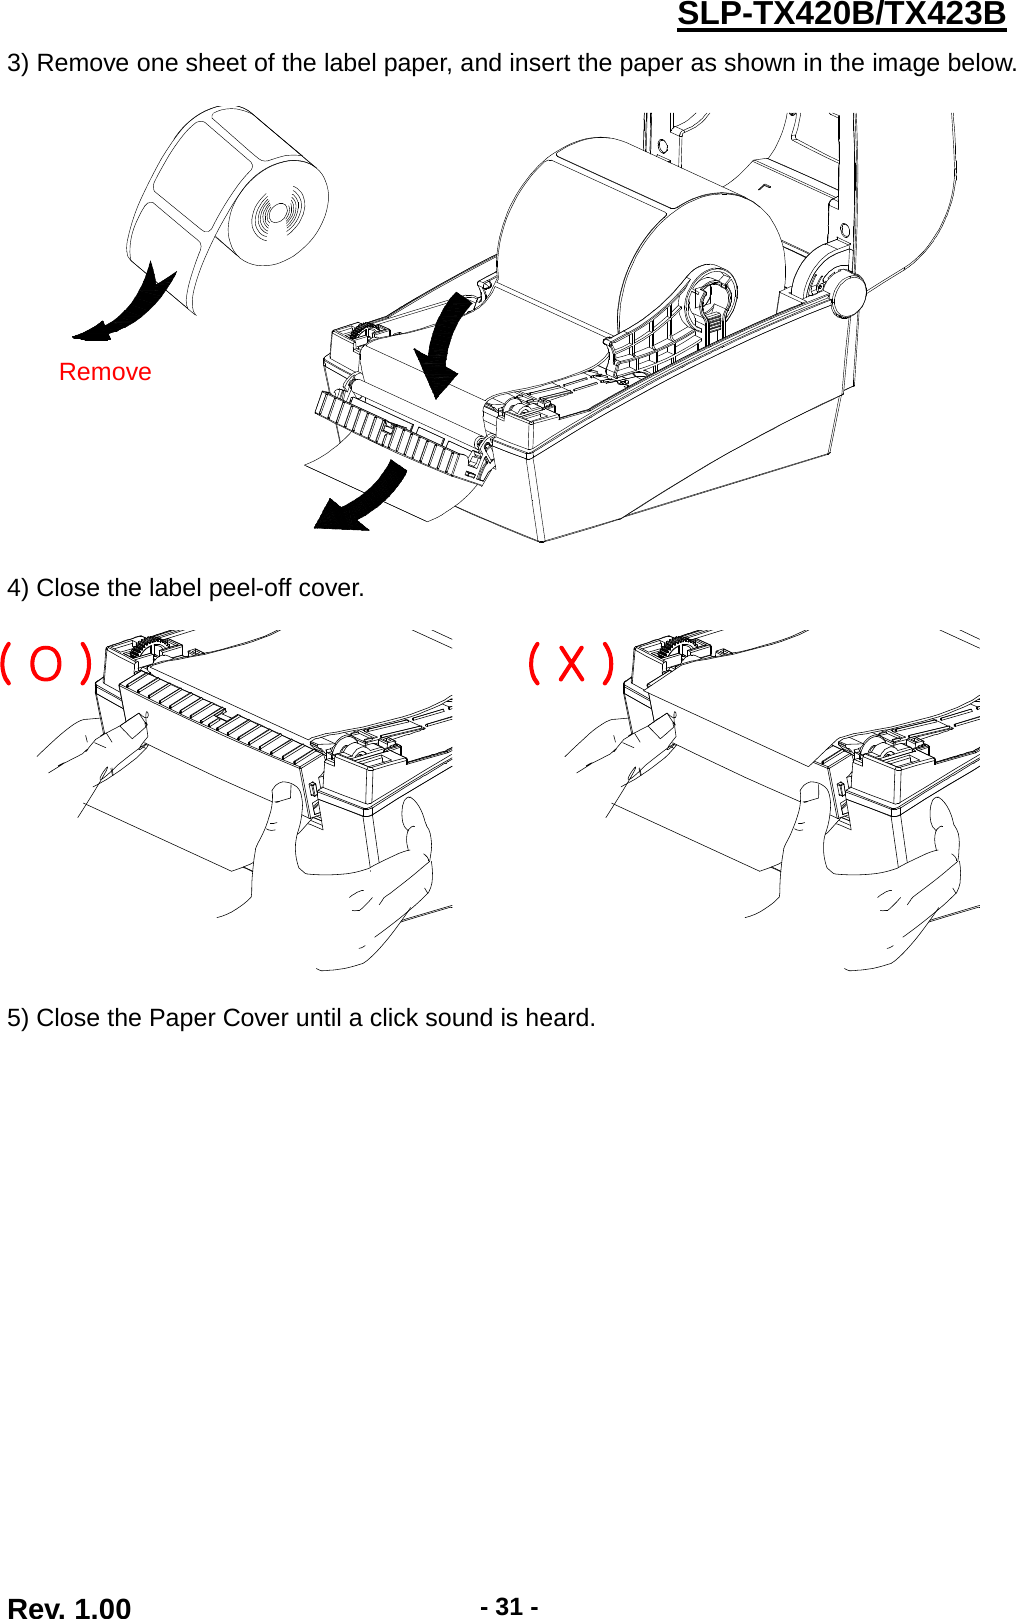  Rev. 1.00 - 31 - SLP-TX420B/TX423B 3) Remove one sheet of the label paper, and insert the paper as shown in the image below.      4) Close the label peel-off cover.    5) Close the Paper Cover until a click sound is heard.   Remove ( O ) ( X ) 